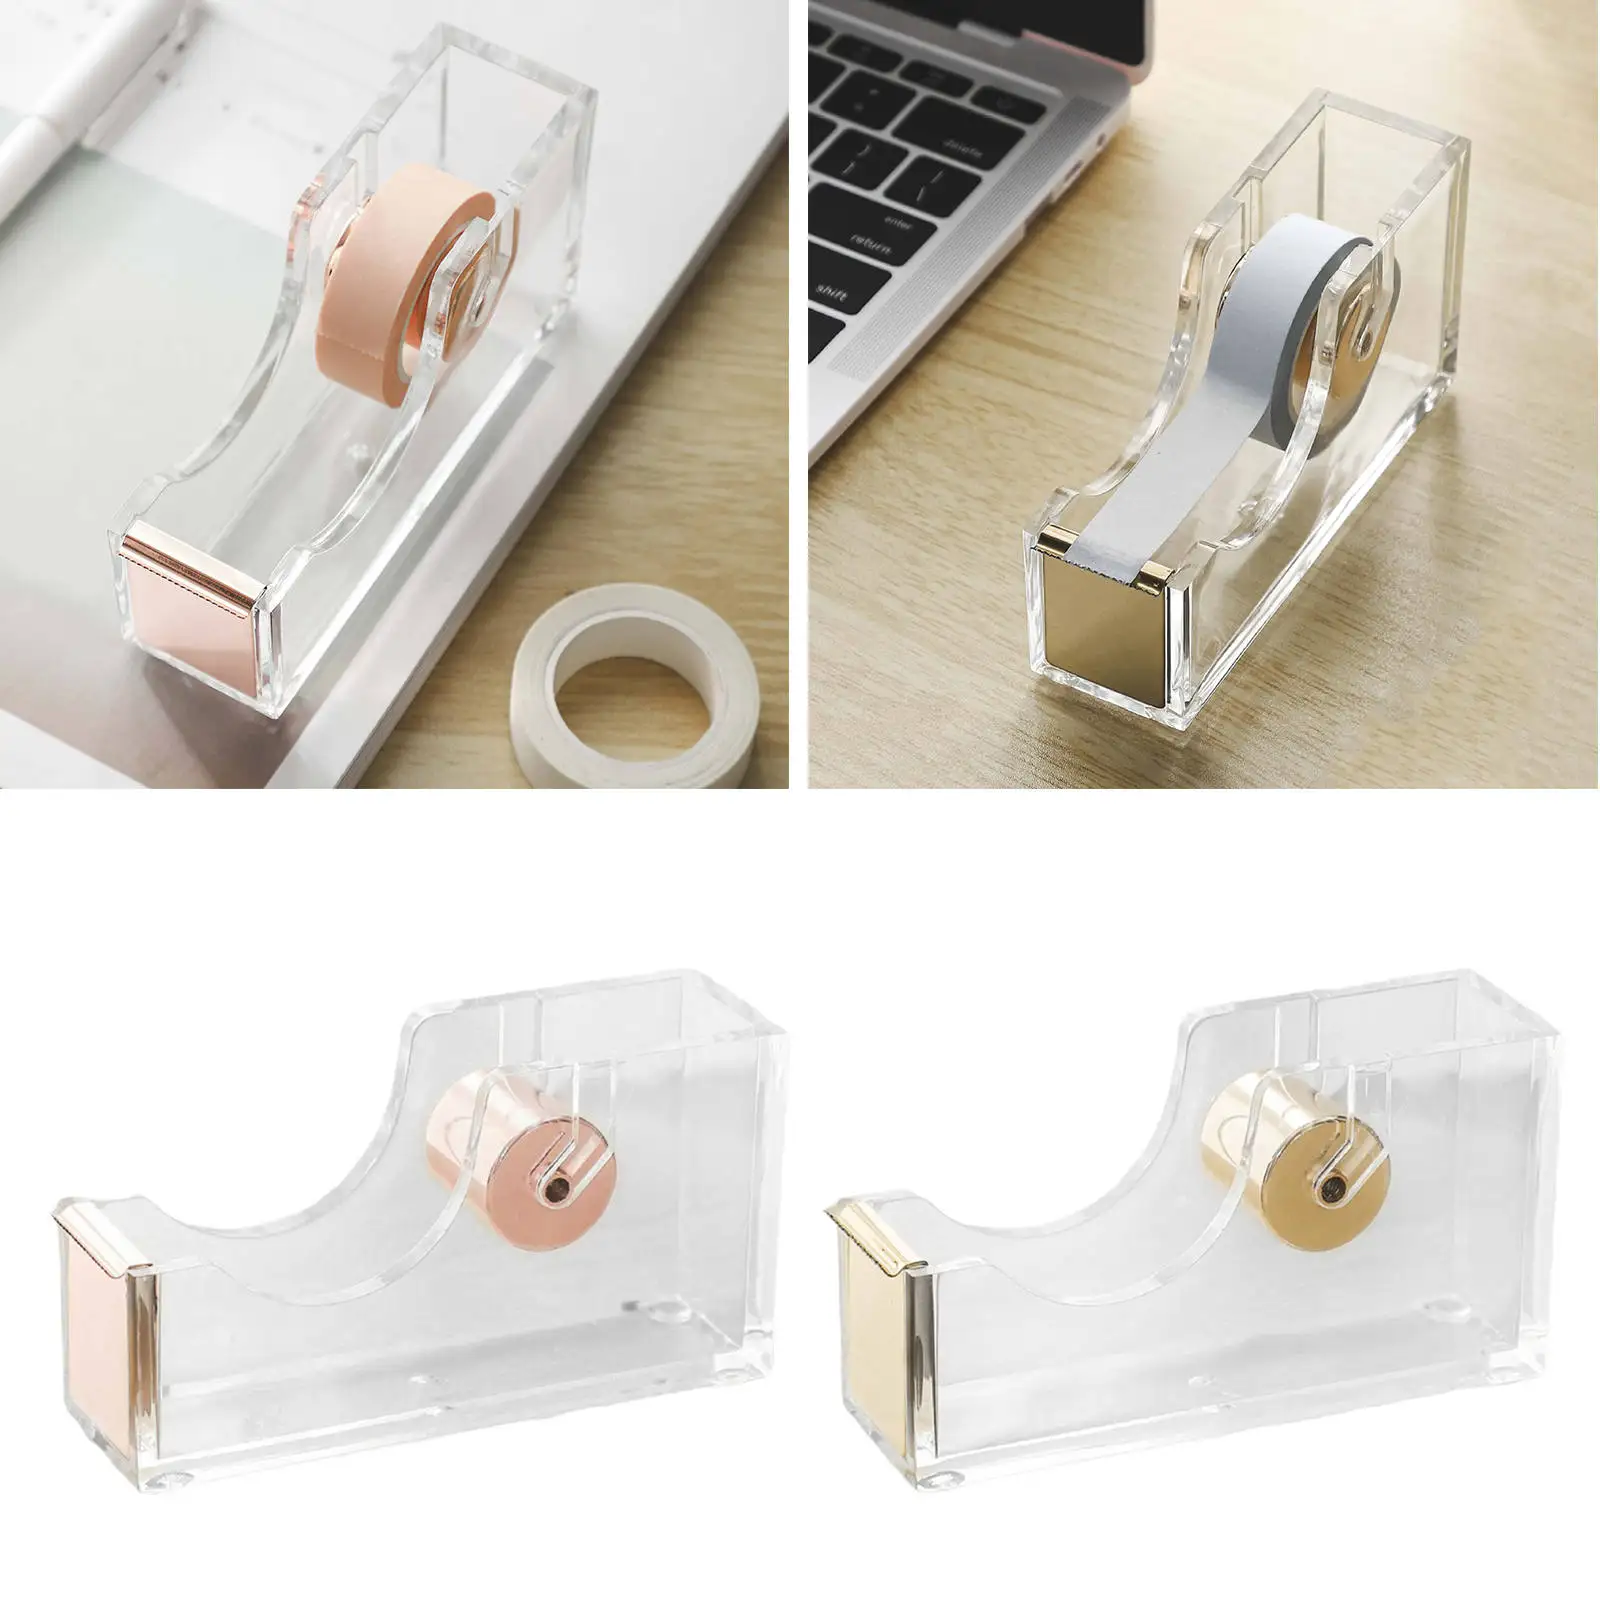 1 Piece Tape Cutter Acrylic Clear Organization Accs Available Stationery Holder Portable Modern for Office Desktop School Home